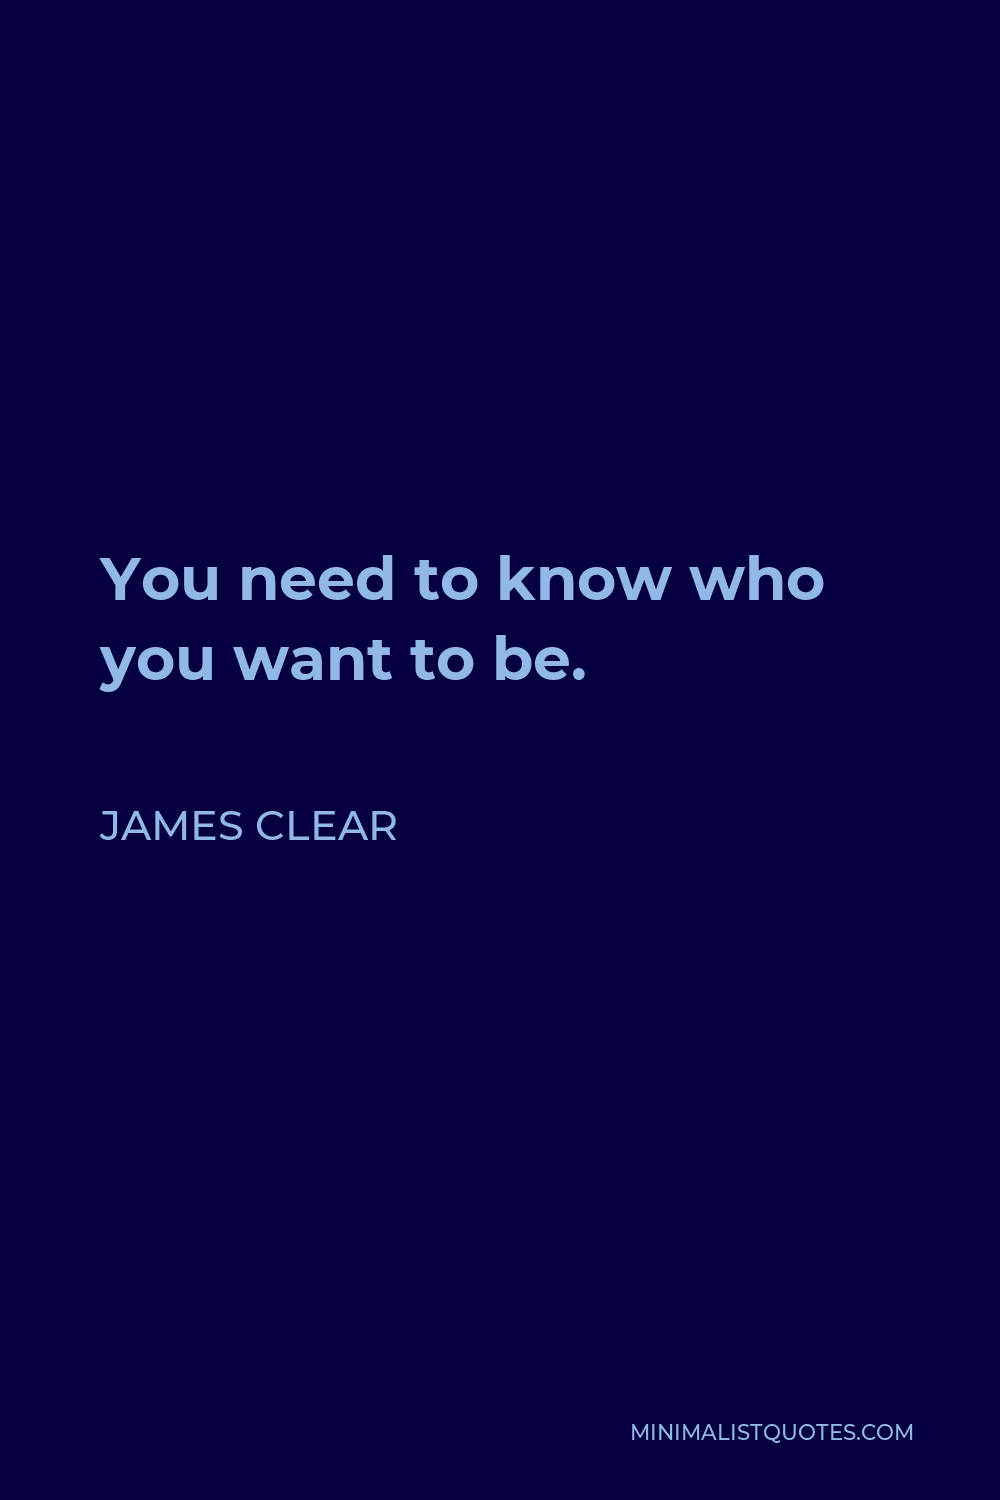 James Clear Quote - You need to know who you want to be.